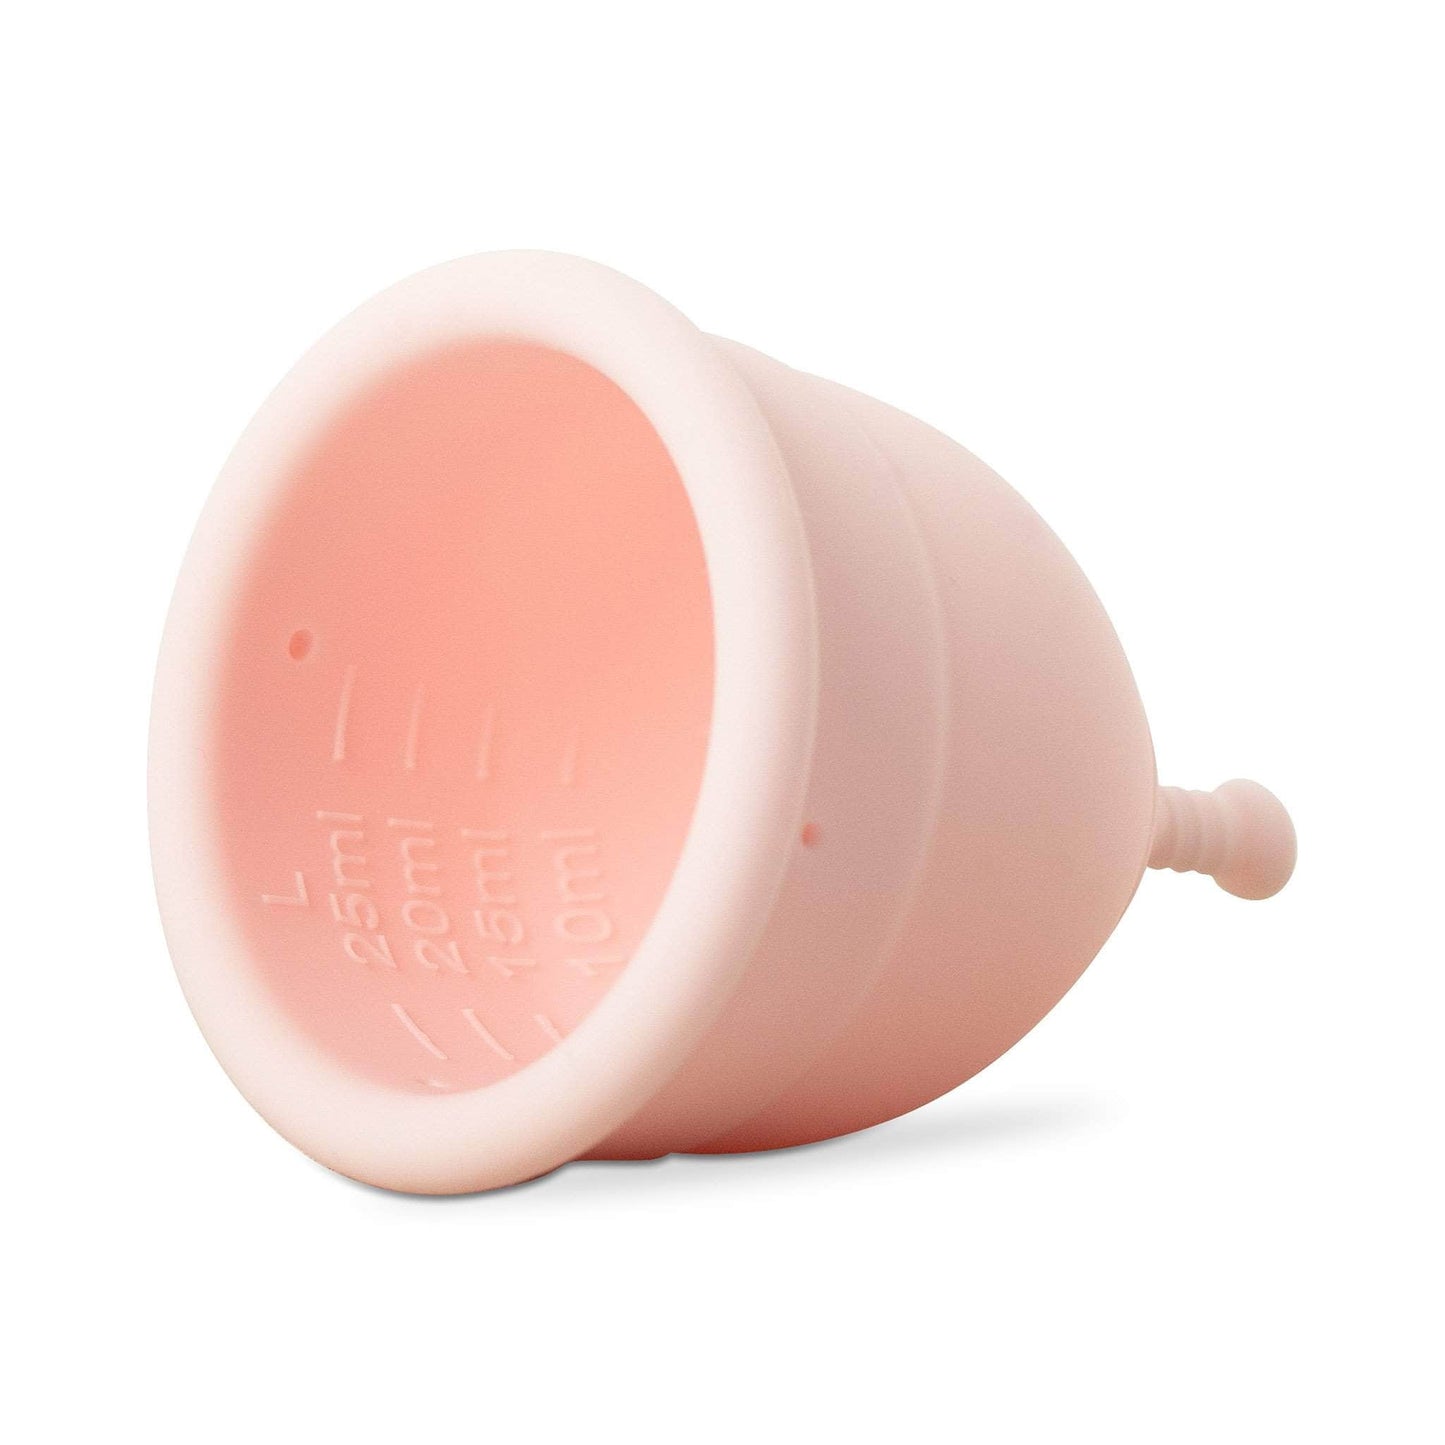 Grace & Green Sanitary Wear Grace & Green - Period Cup Size B Rosewater Pink